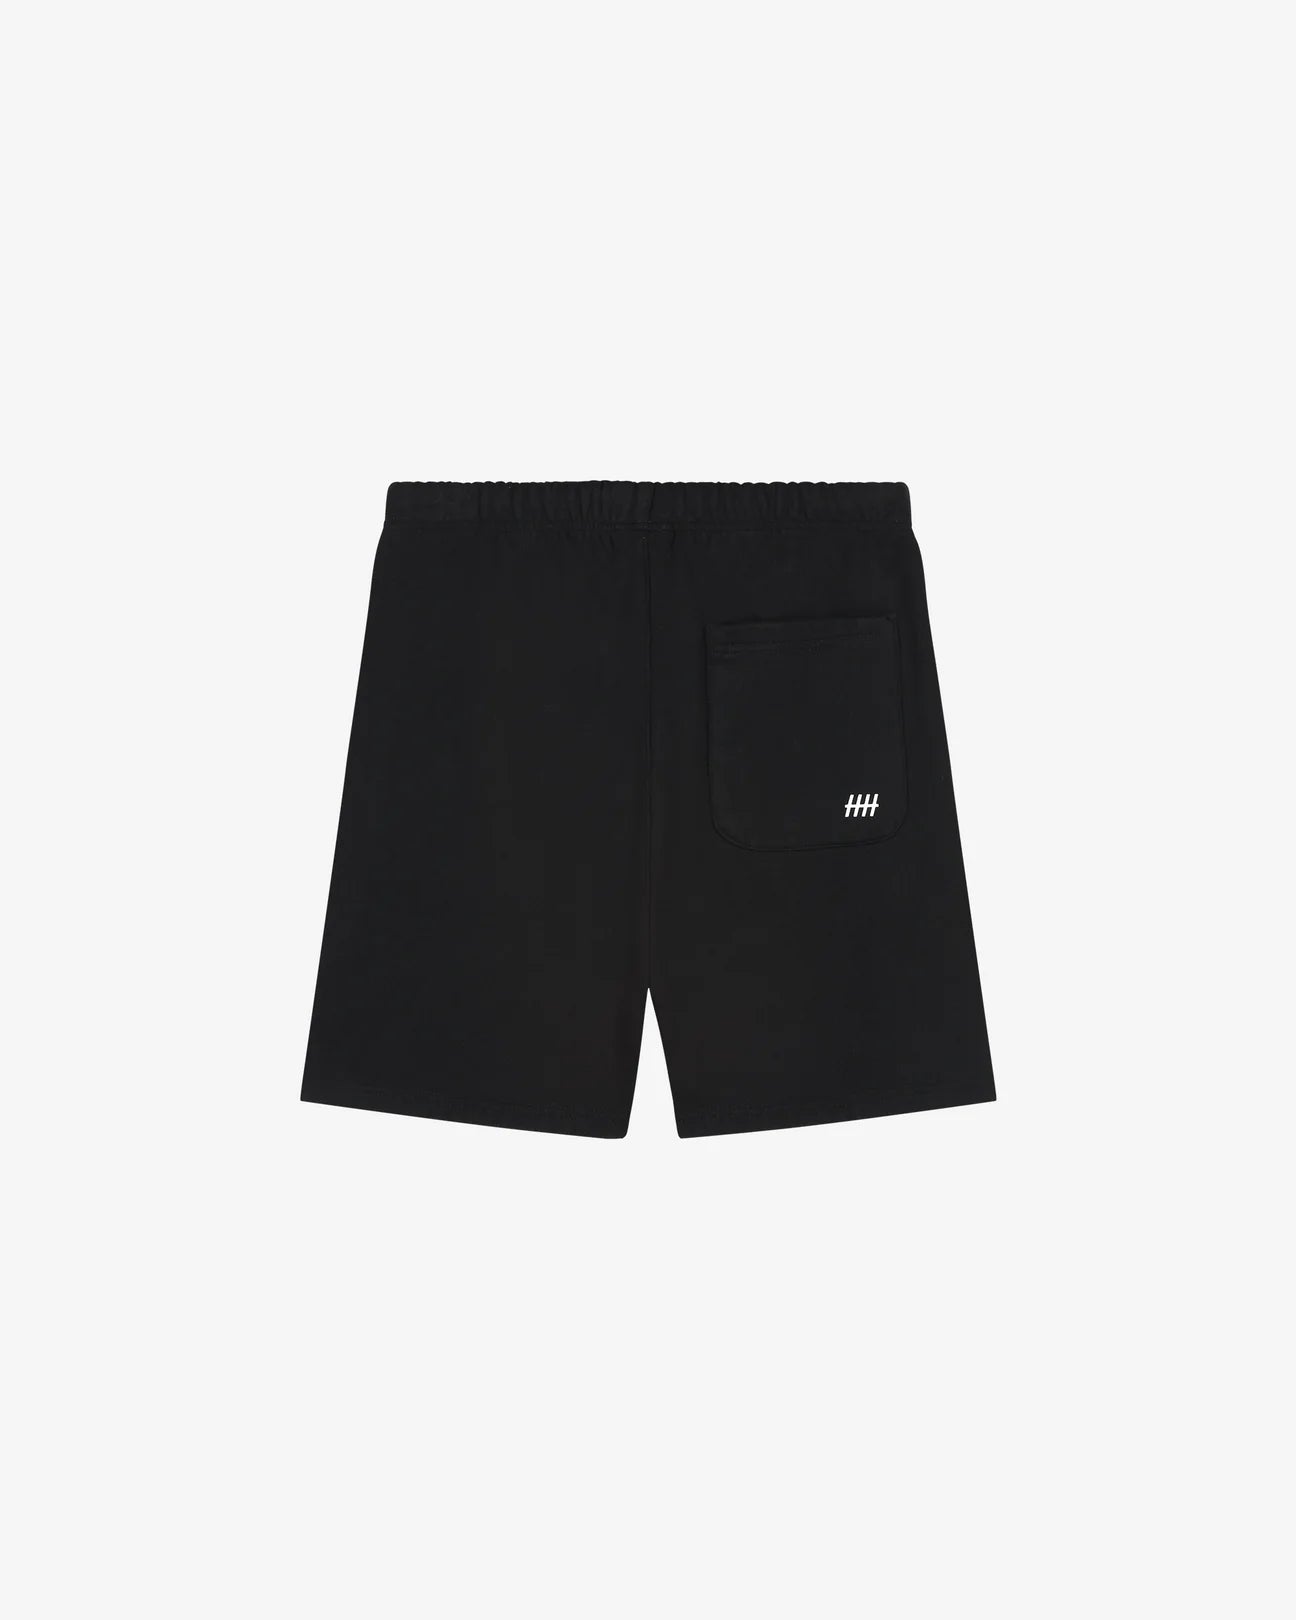 REPRIMANDE - RELAXED FIT SHORT CLASSIC BLACK